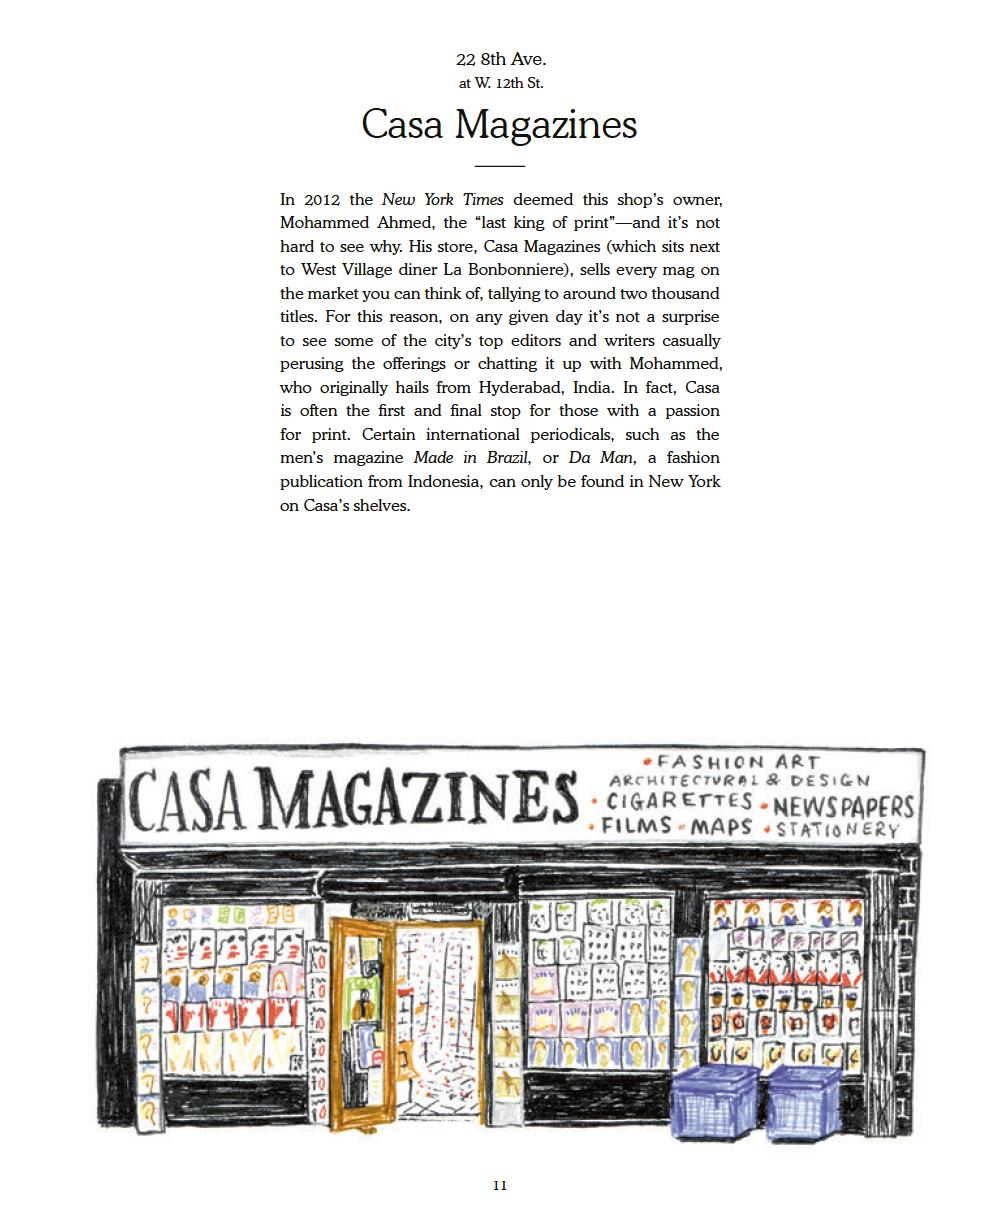 NYC Storefront Cover & Inside pages_页面_13.jpg